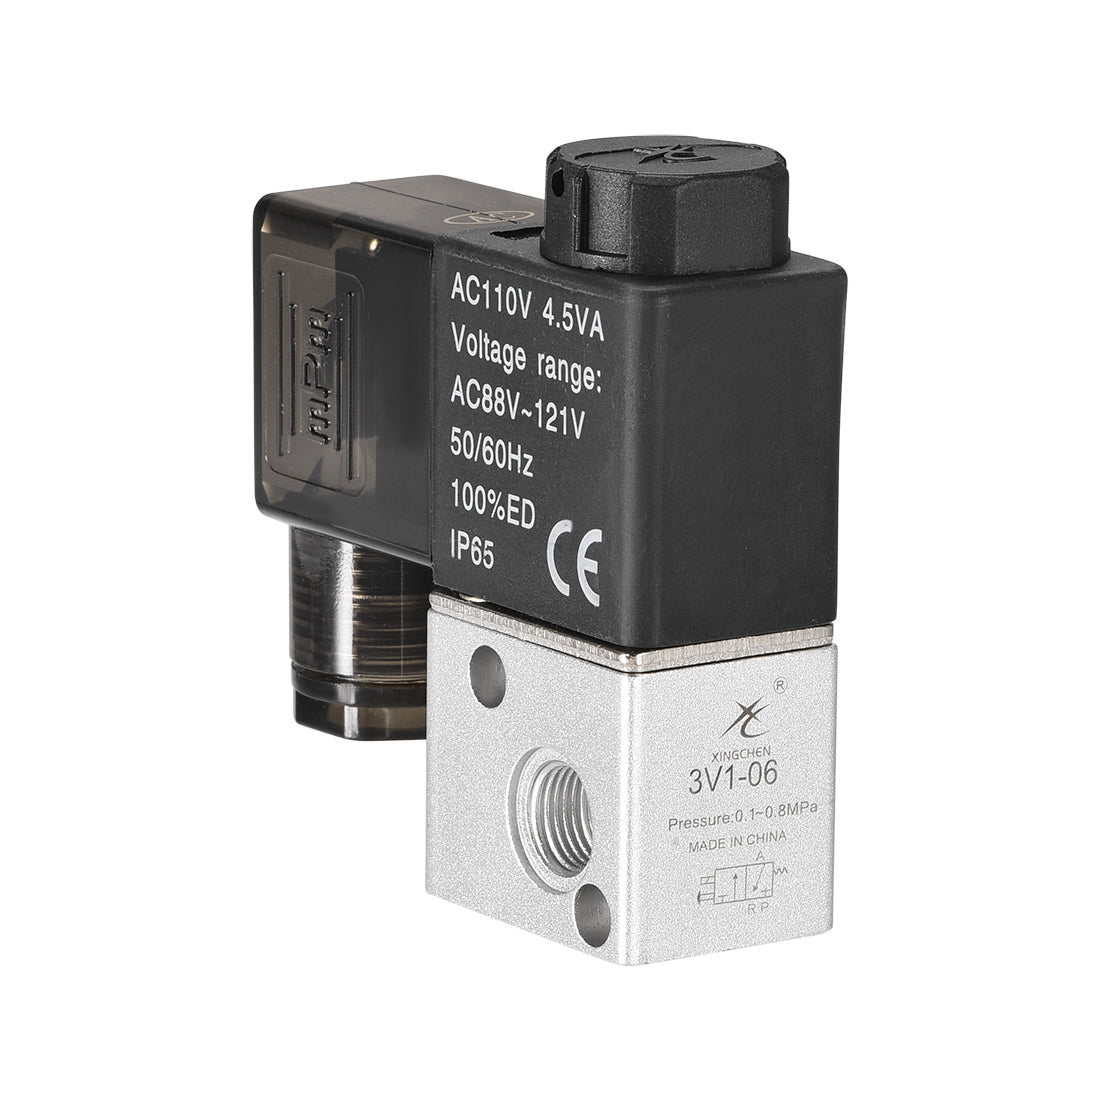 uxcell Uxcell 3V1-06 Pneumatic Air NC Single Electrical Control Solenoid Valve AC 110V 3 Way 2 Position 1/8" PT Internally Piloted Acting Type